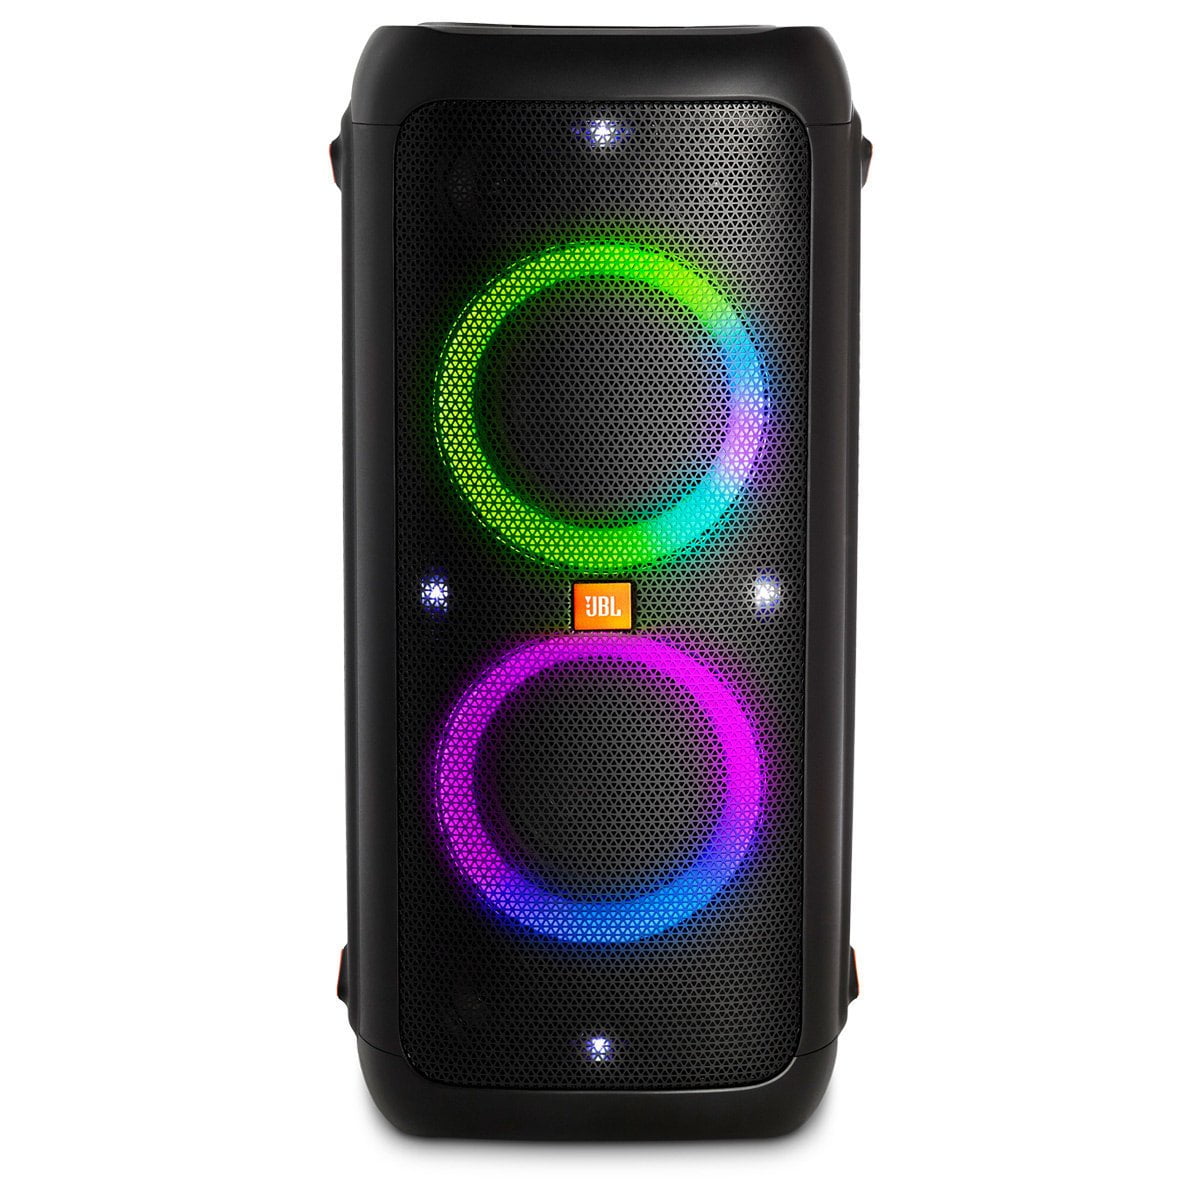 JBL Party Box 310 Portable Party Speaker - Micro Center